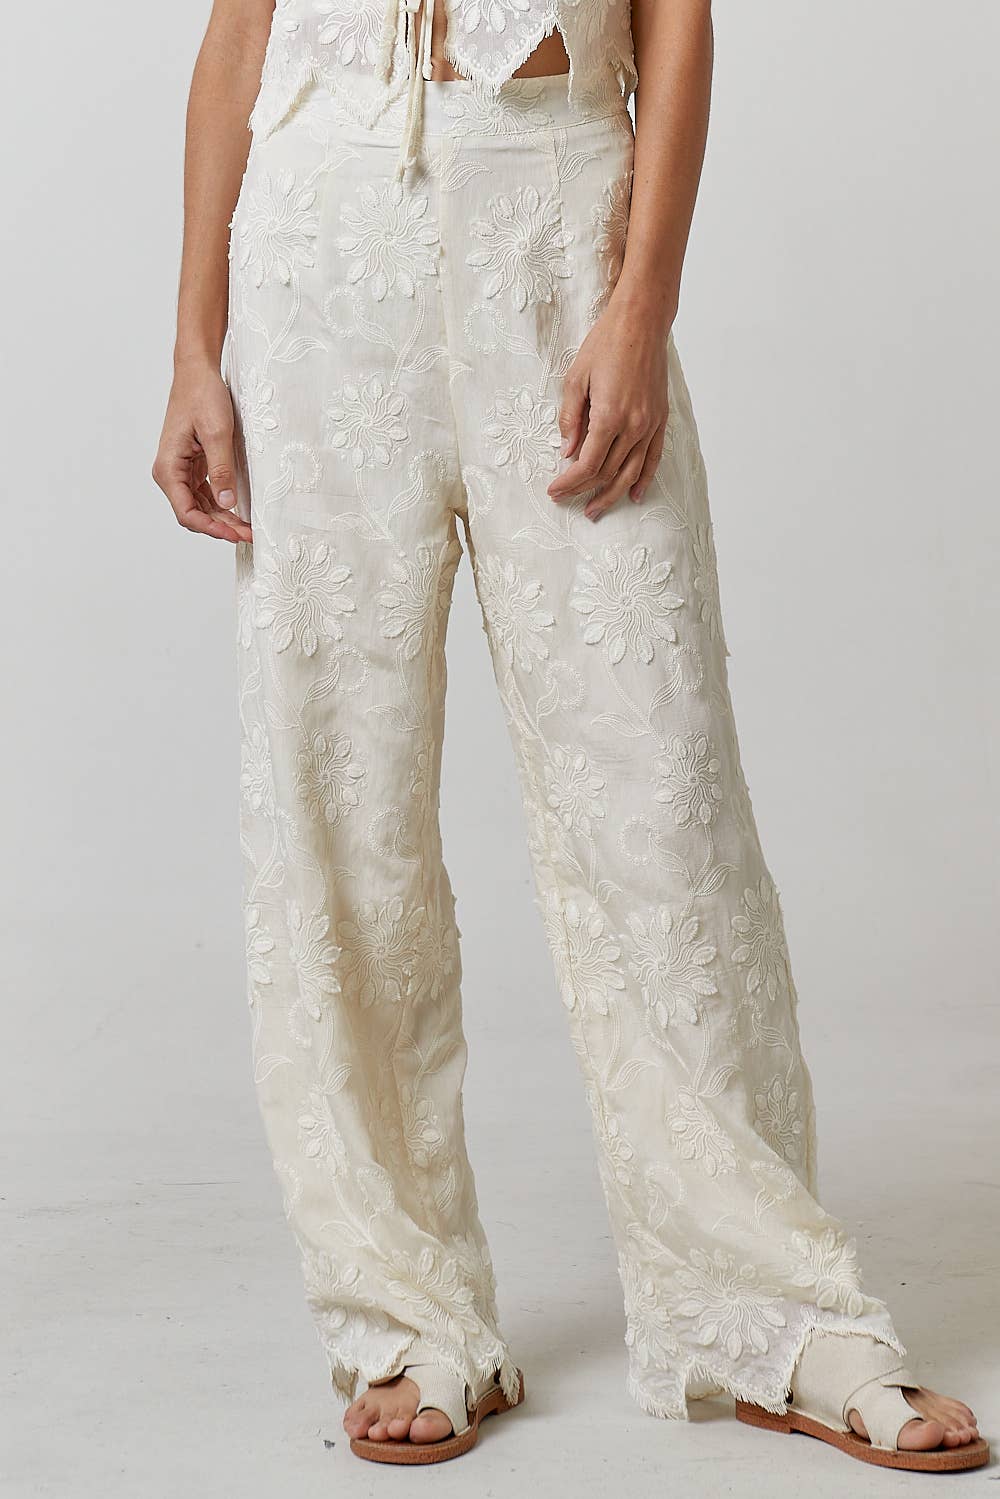 FLORAL EMBROIDERY WIDE LEG TROUSER PANTS